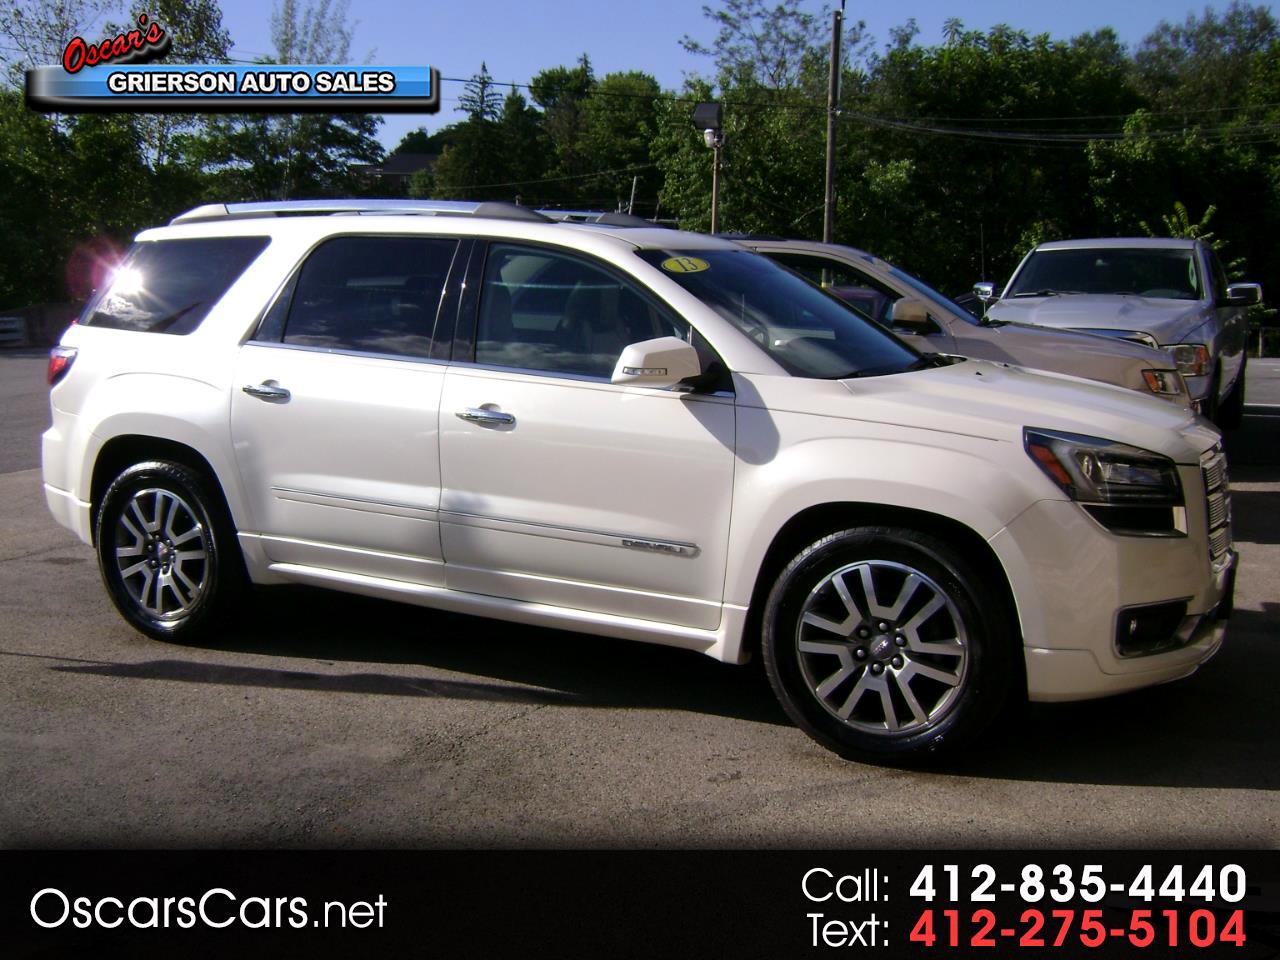 Used 2013 Gmc Acadia Awd 4dr Denali For Sale In South Park